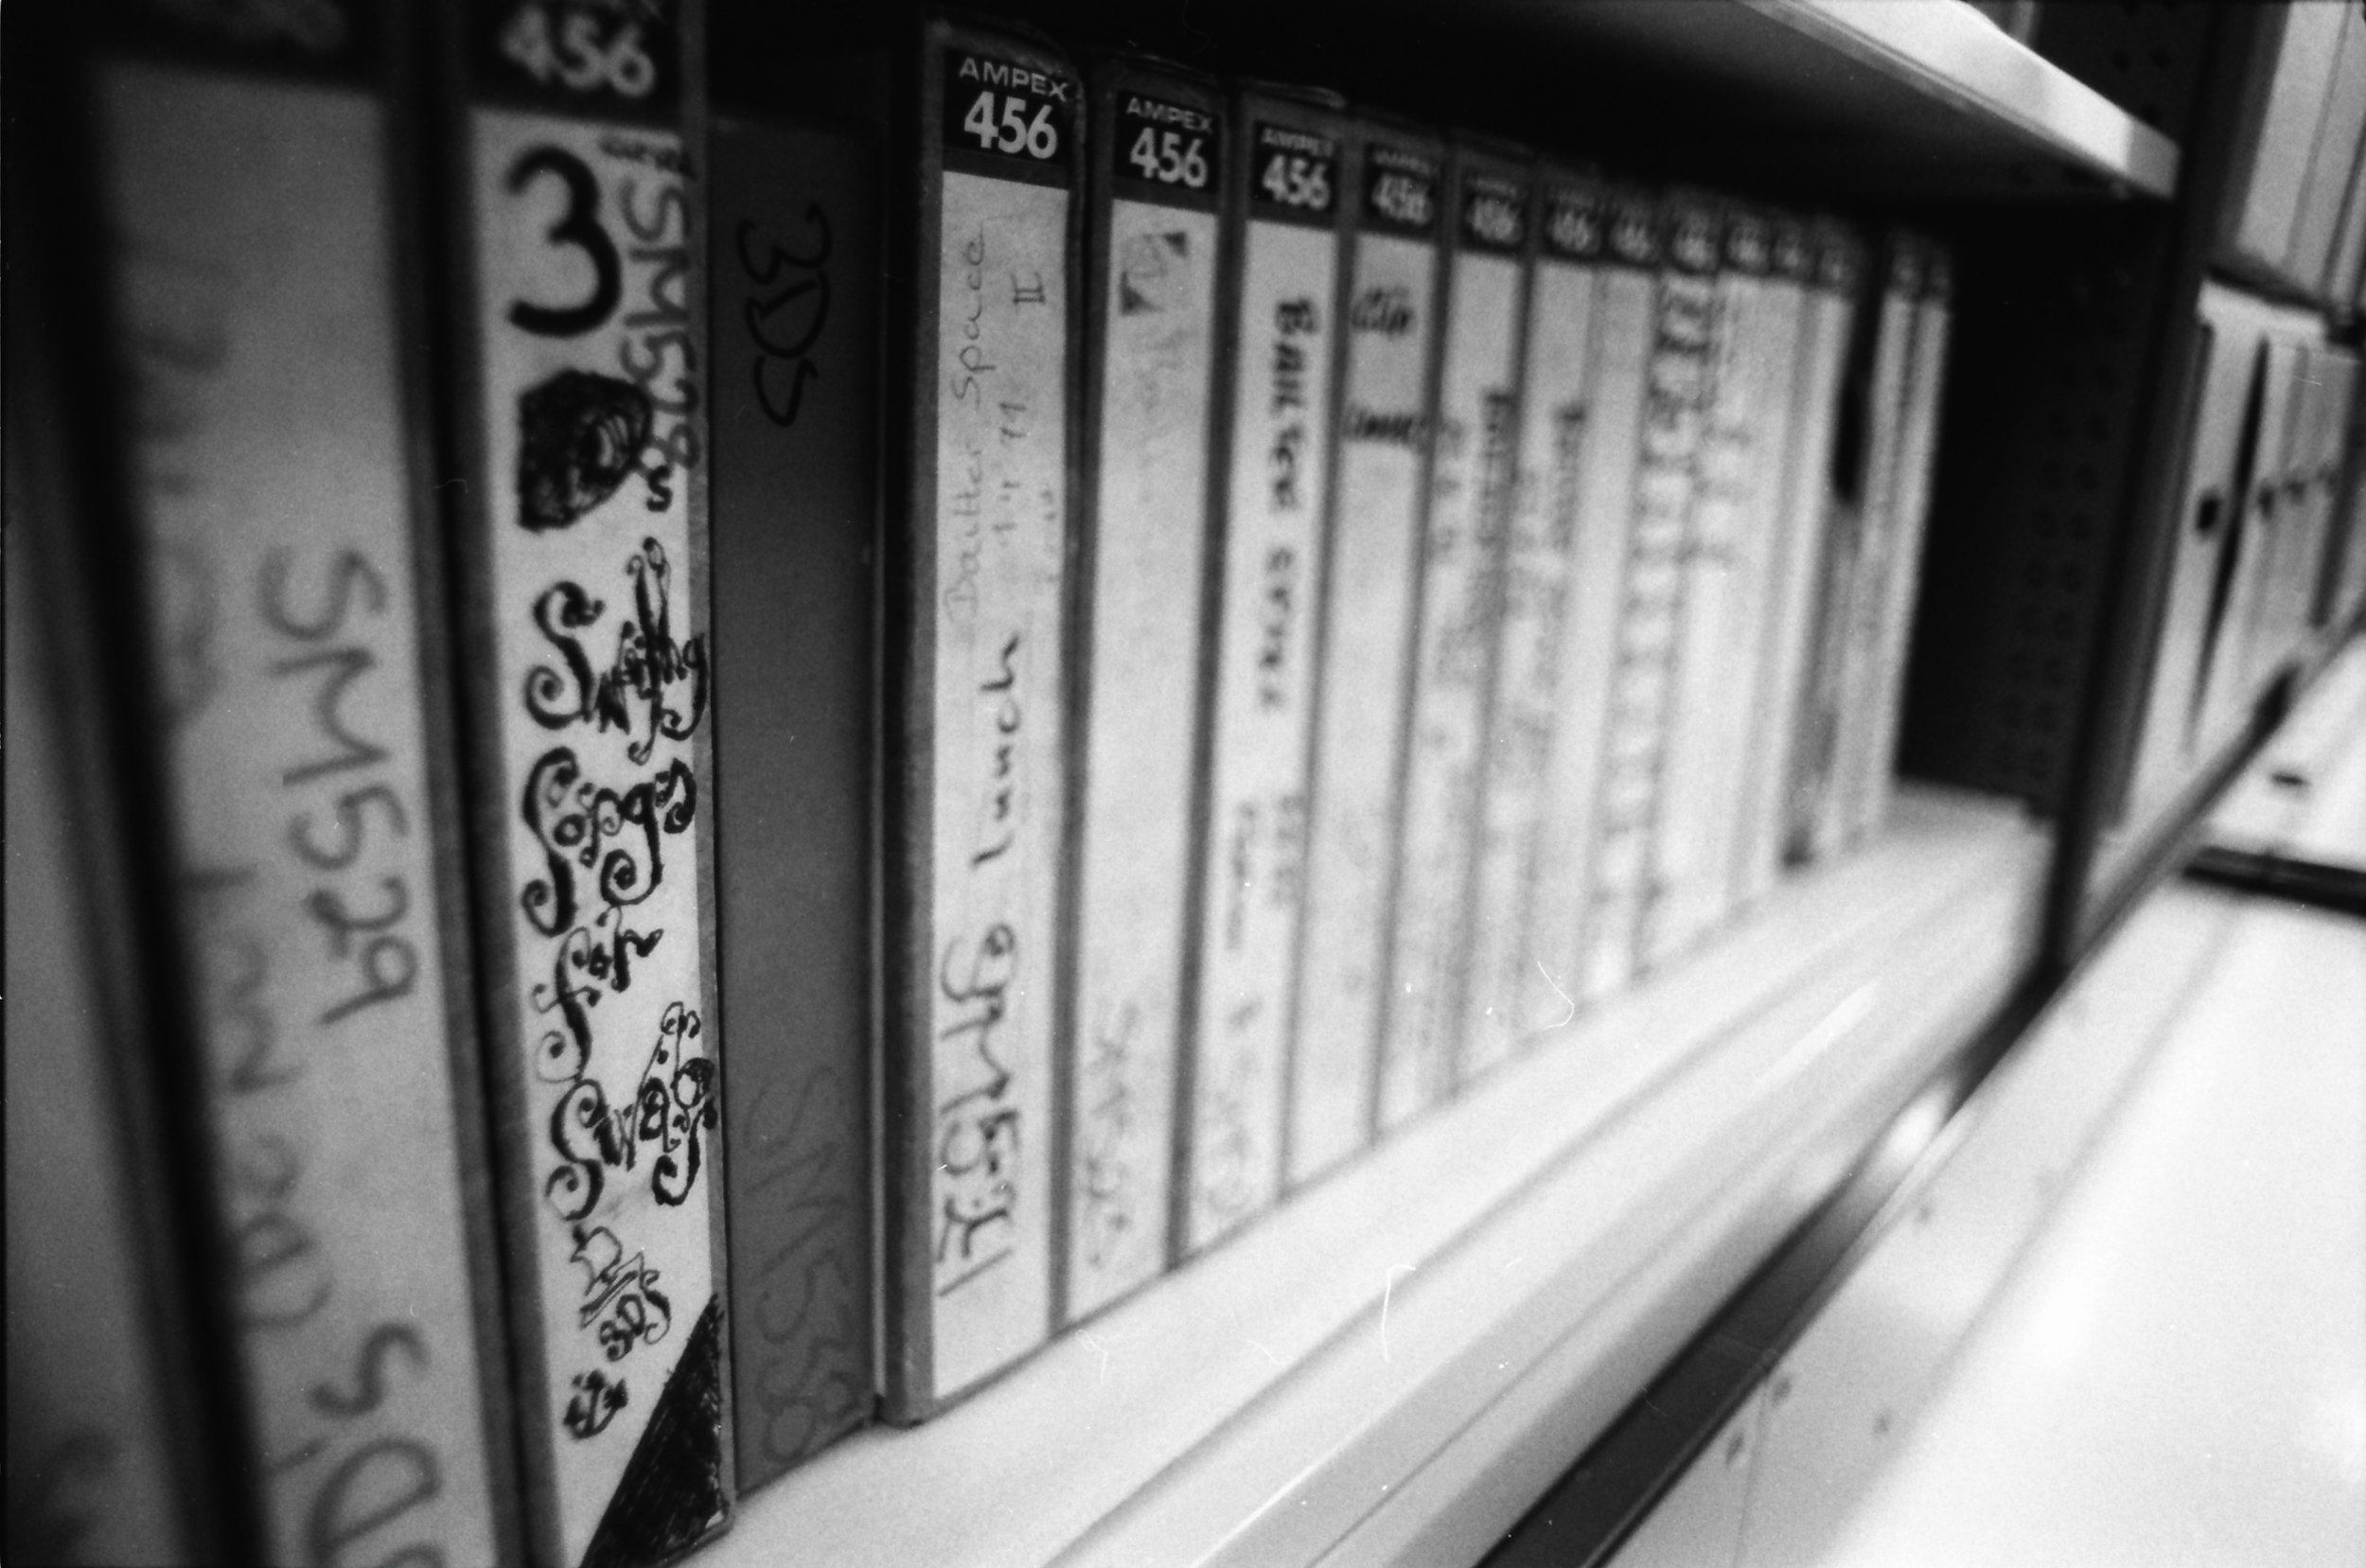 Some of the Flying Nun master tapes - photo taken with b&amp;w Illford Delta 35mm film, Nikon FE2 Nikkor 24mm f2